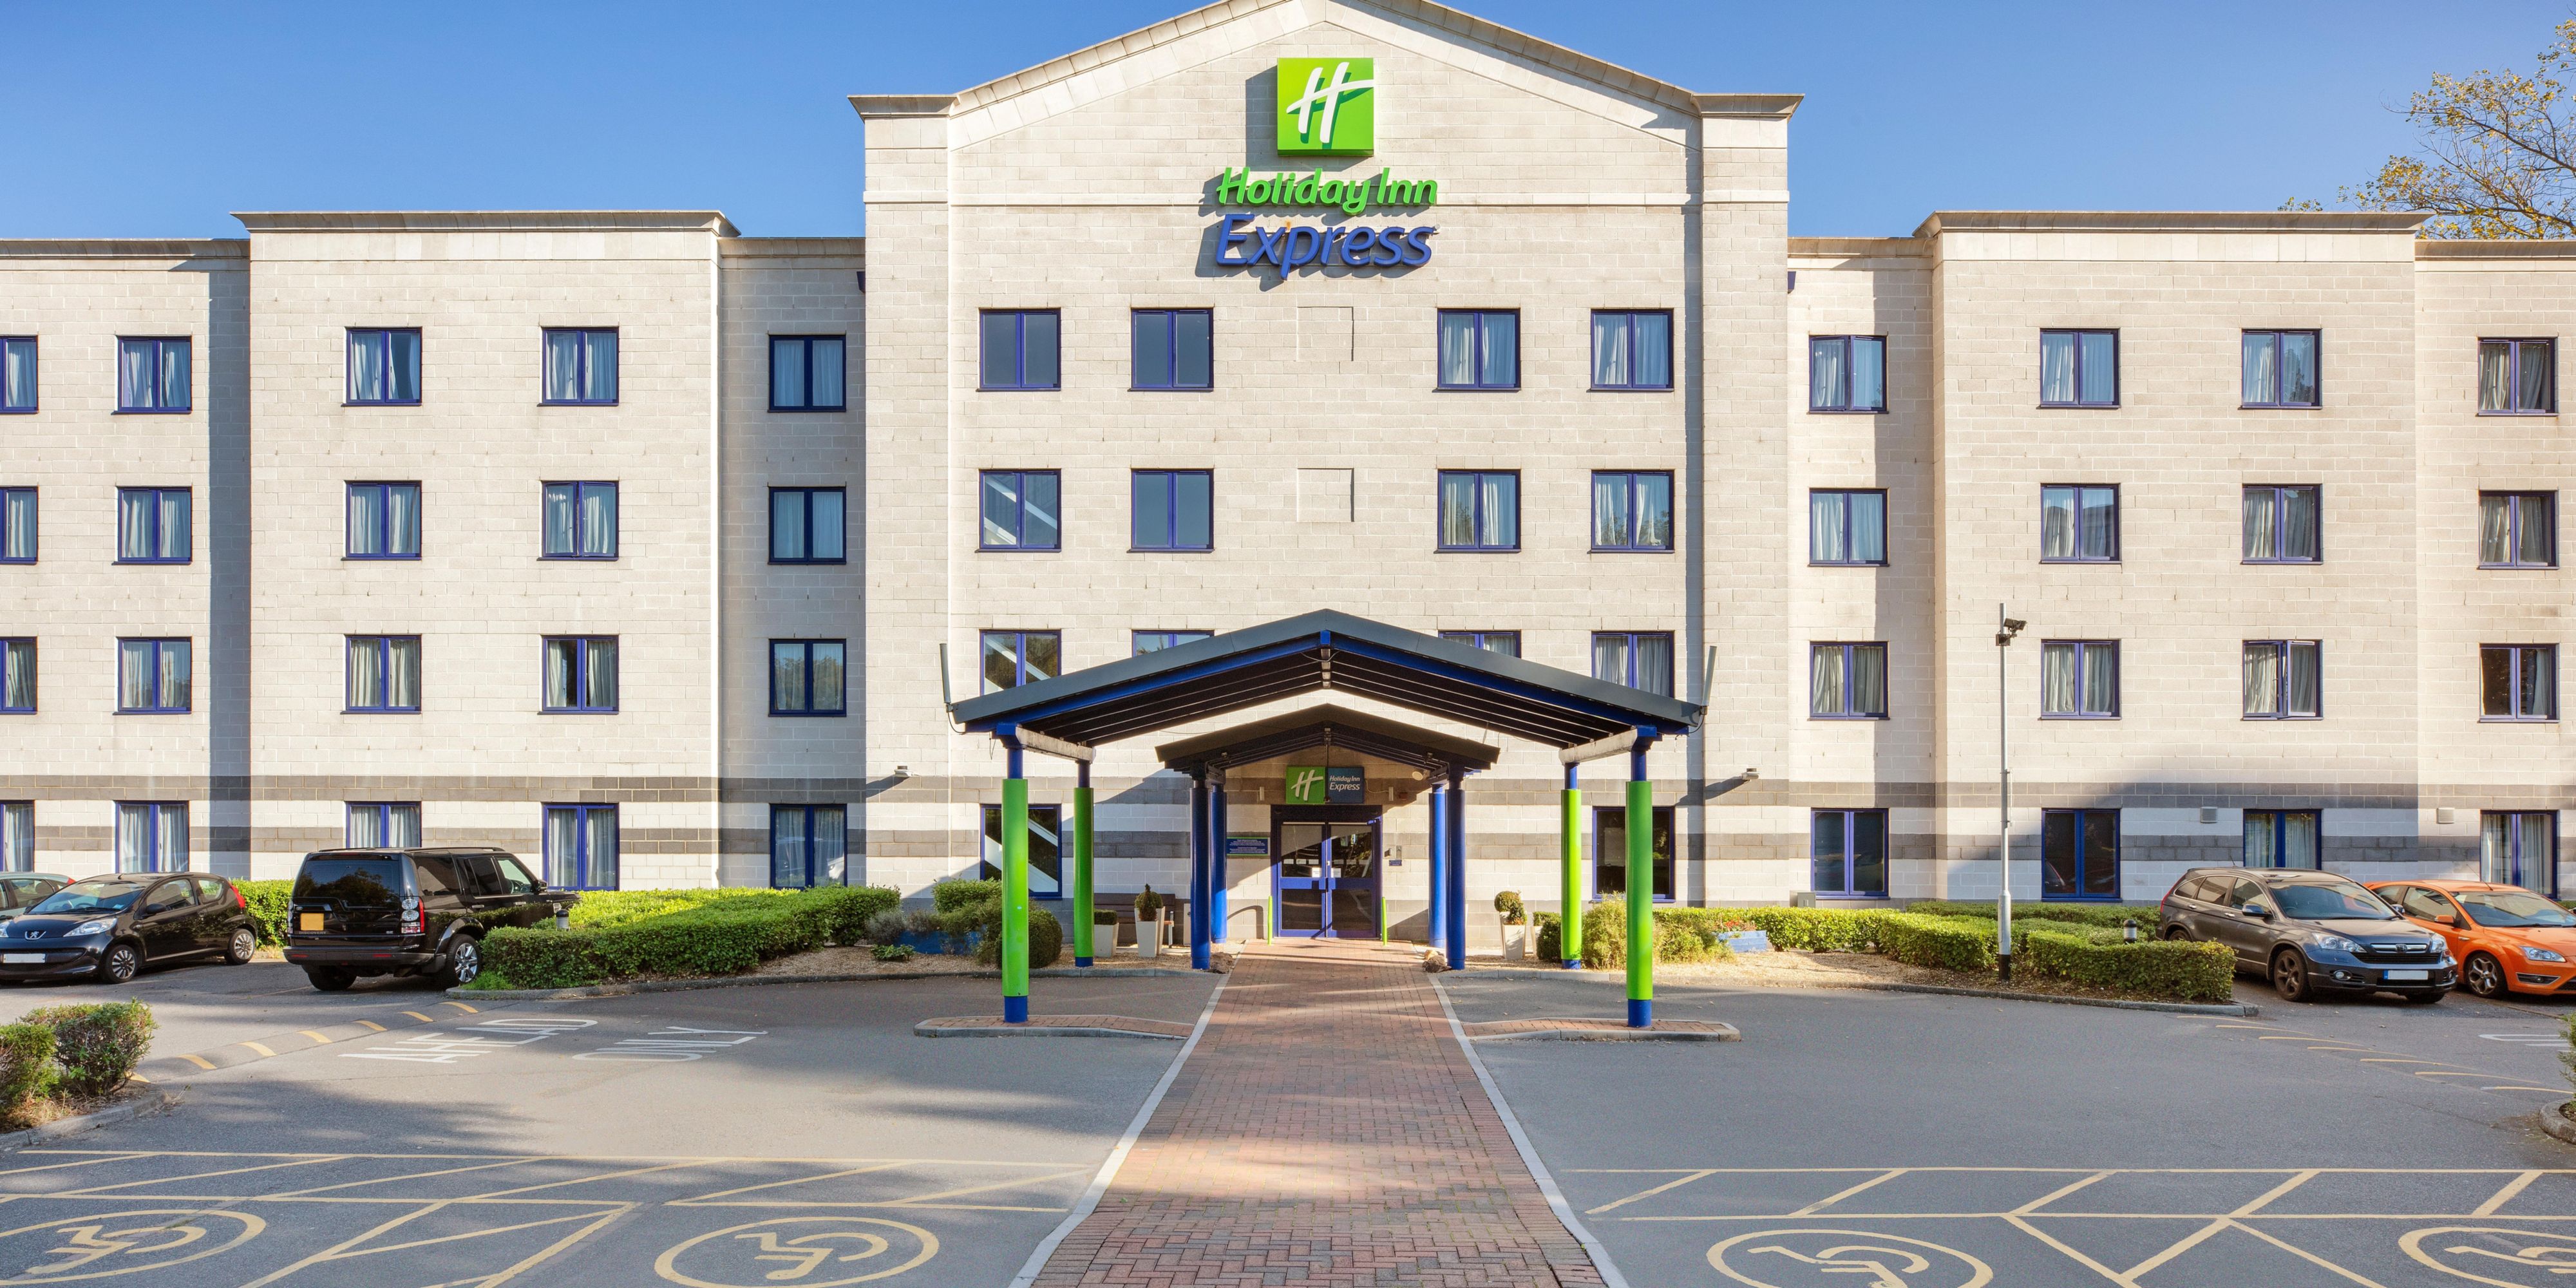 A welcoming hotel with free Wi-Fi and breakfast included in Poole town centre, near major business offices.
Holiday Inn Express® Poole hotel is a quick walk from Poole railway station.